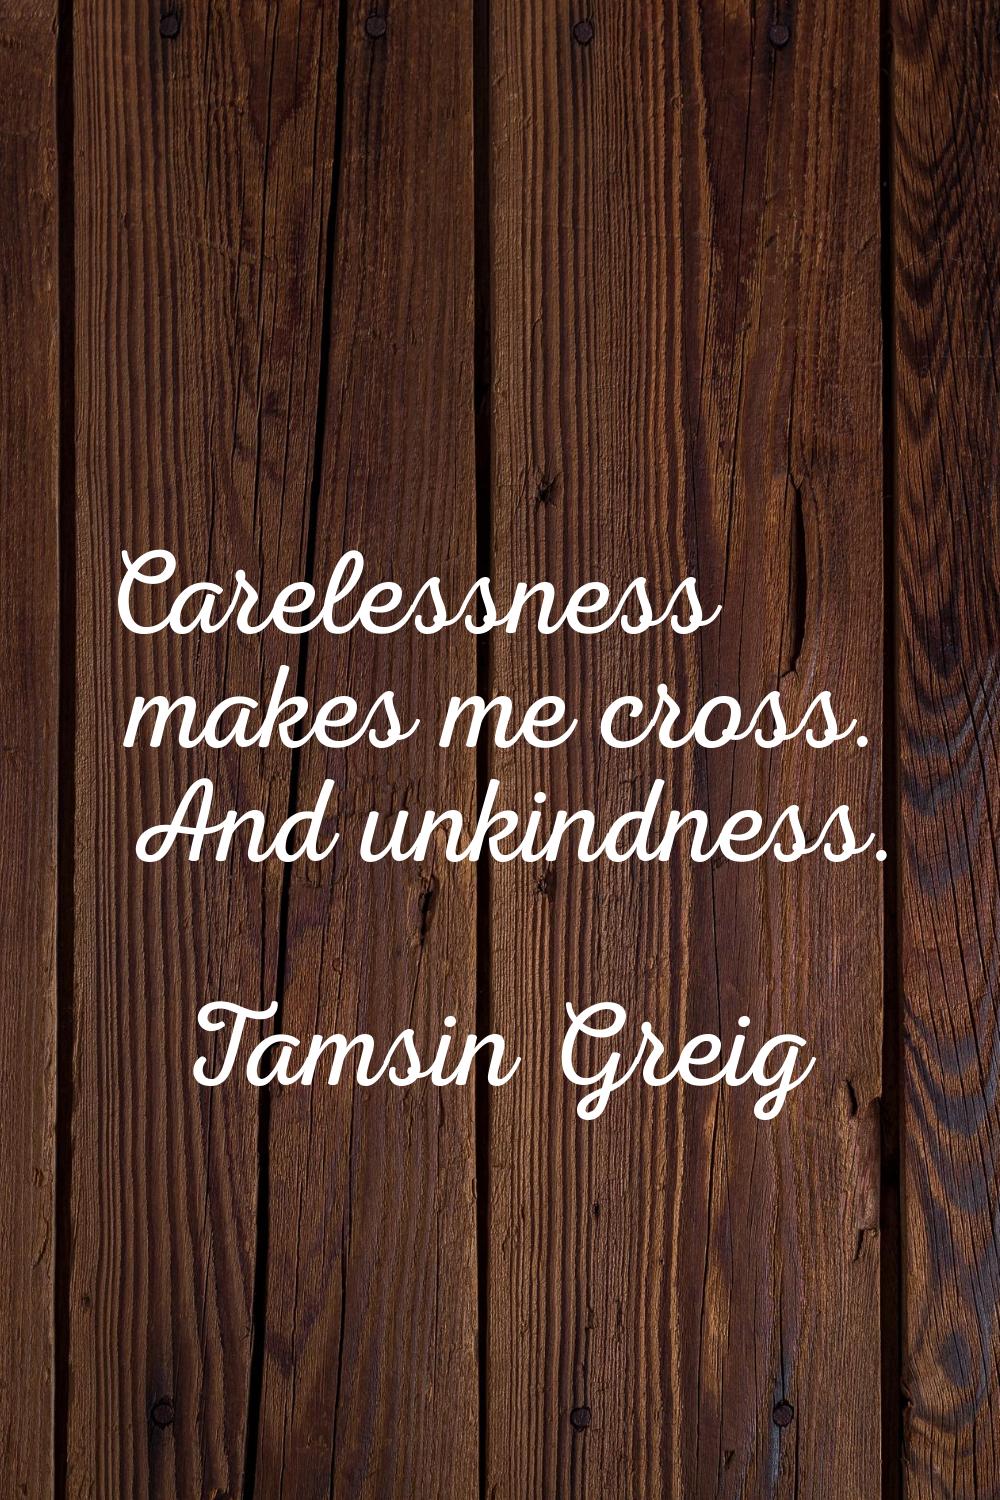 Carelessness makes me cross. And unkindness.